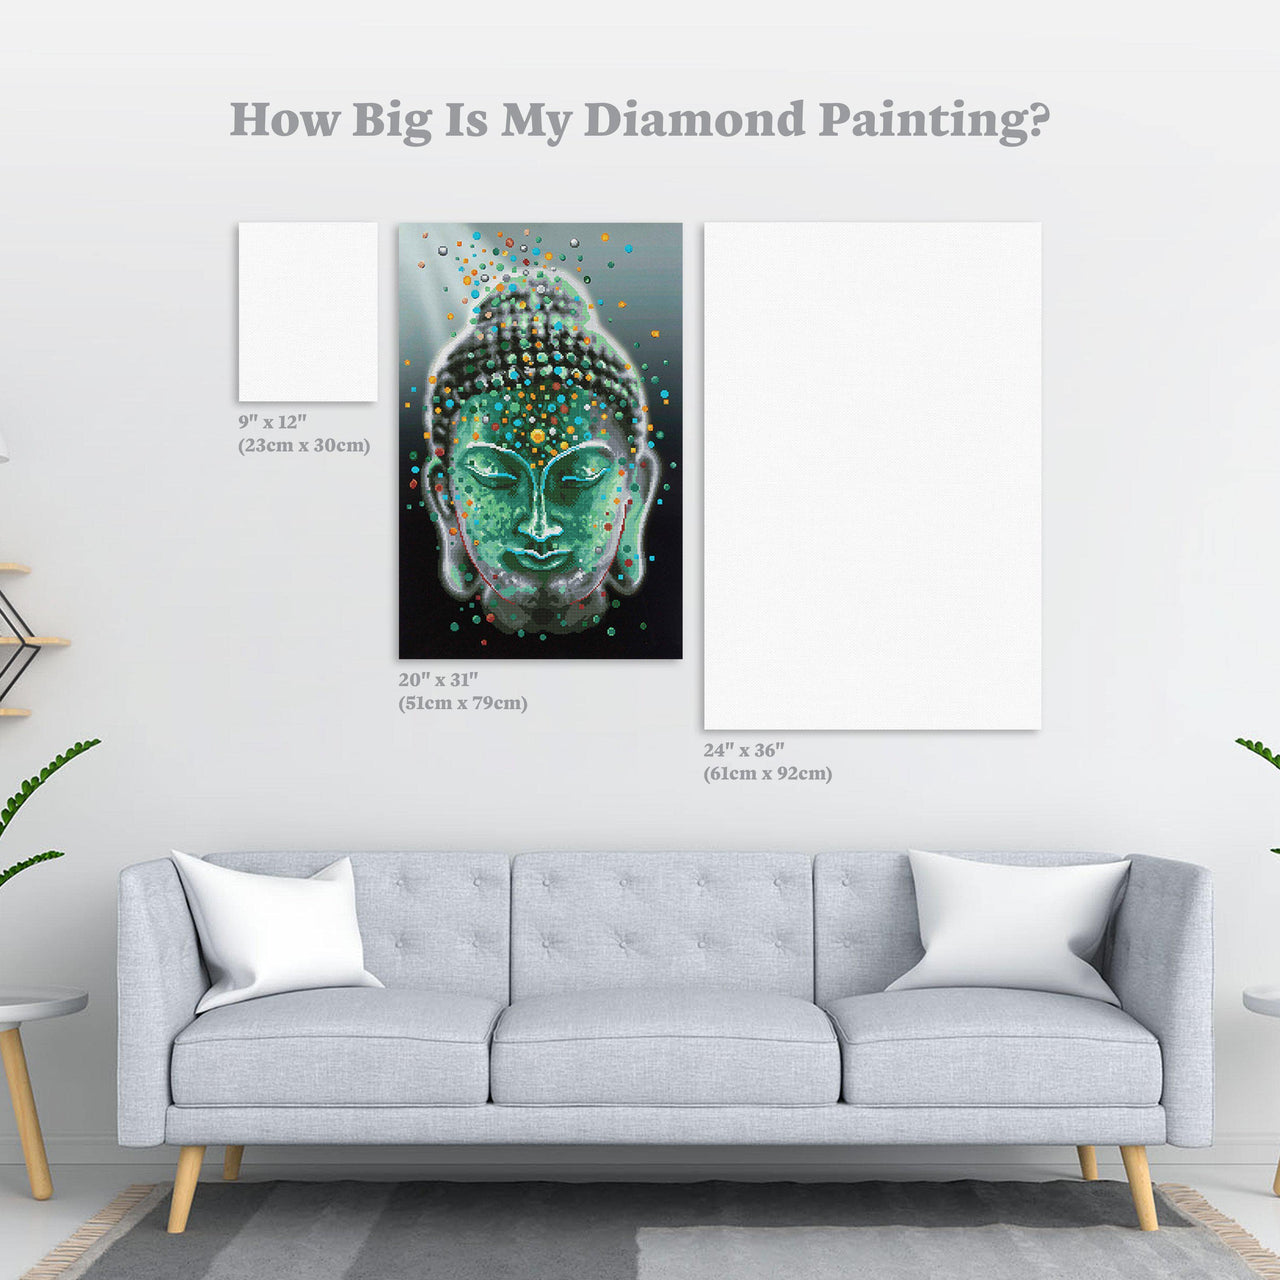 Diamond Painting Buddha Deep Serenity 20" x 31″ (51cm x 79cm) / Round with 33 Colors including 2 ABs / 28,447